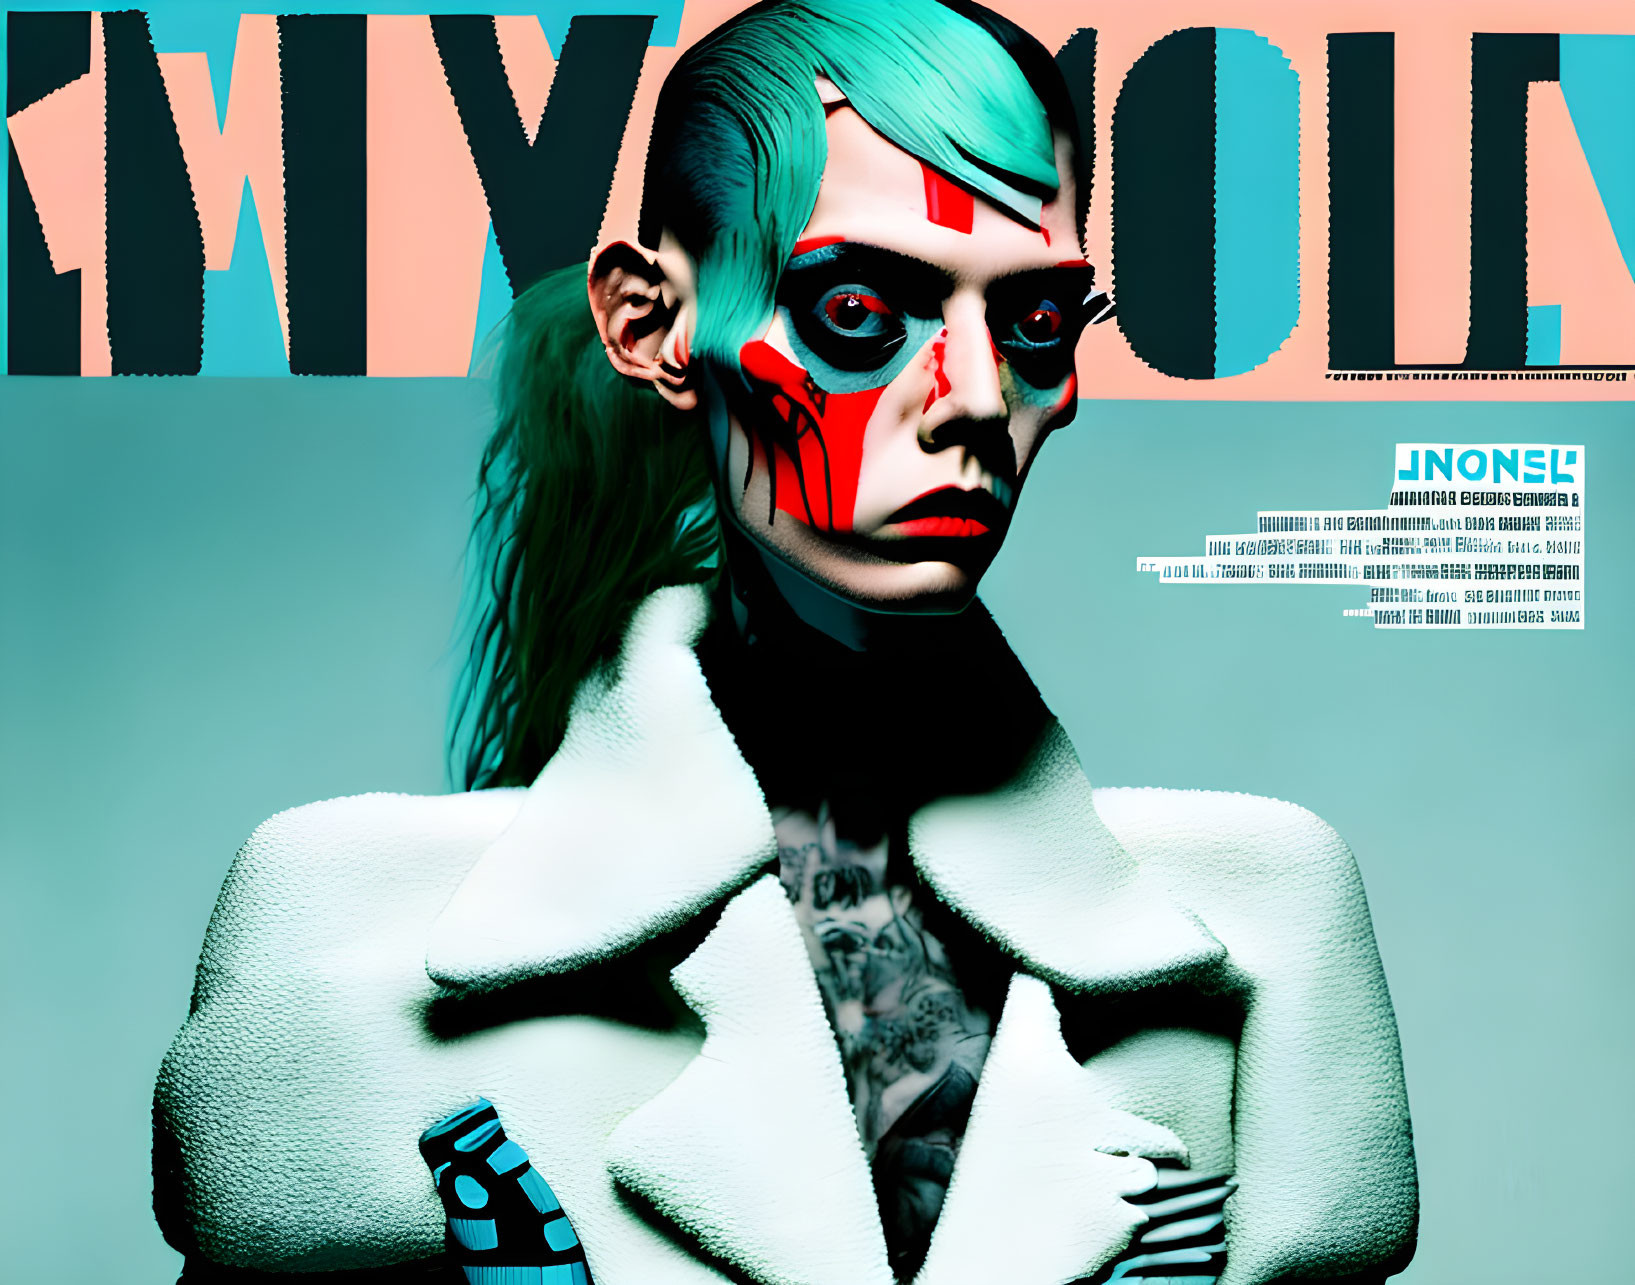 Person with Red and Black Makeup, Turquoise Hair, and White Jacket on Fashion Magazine Cover